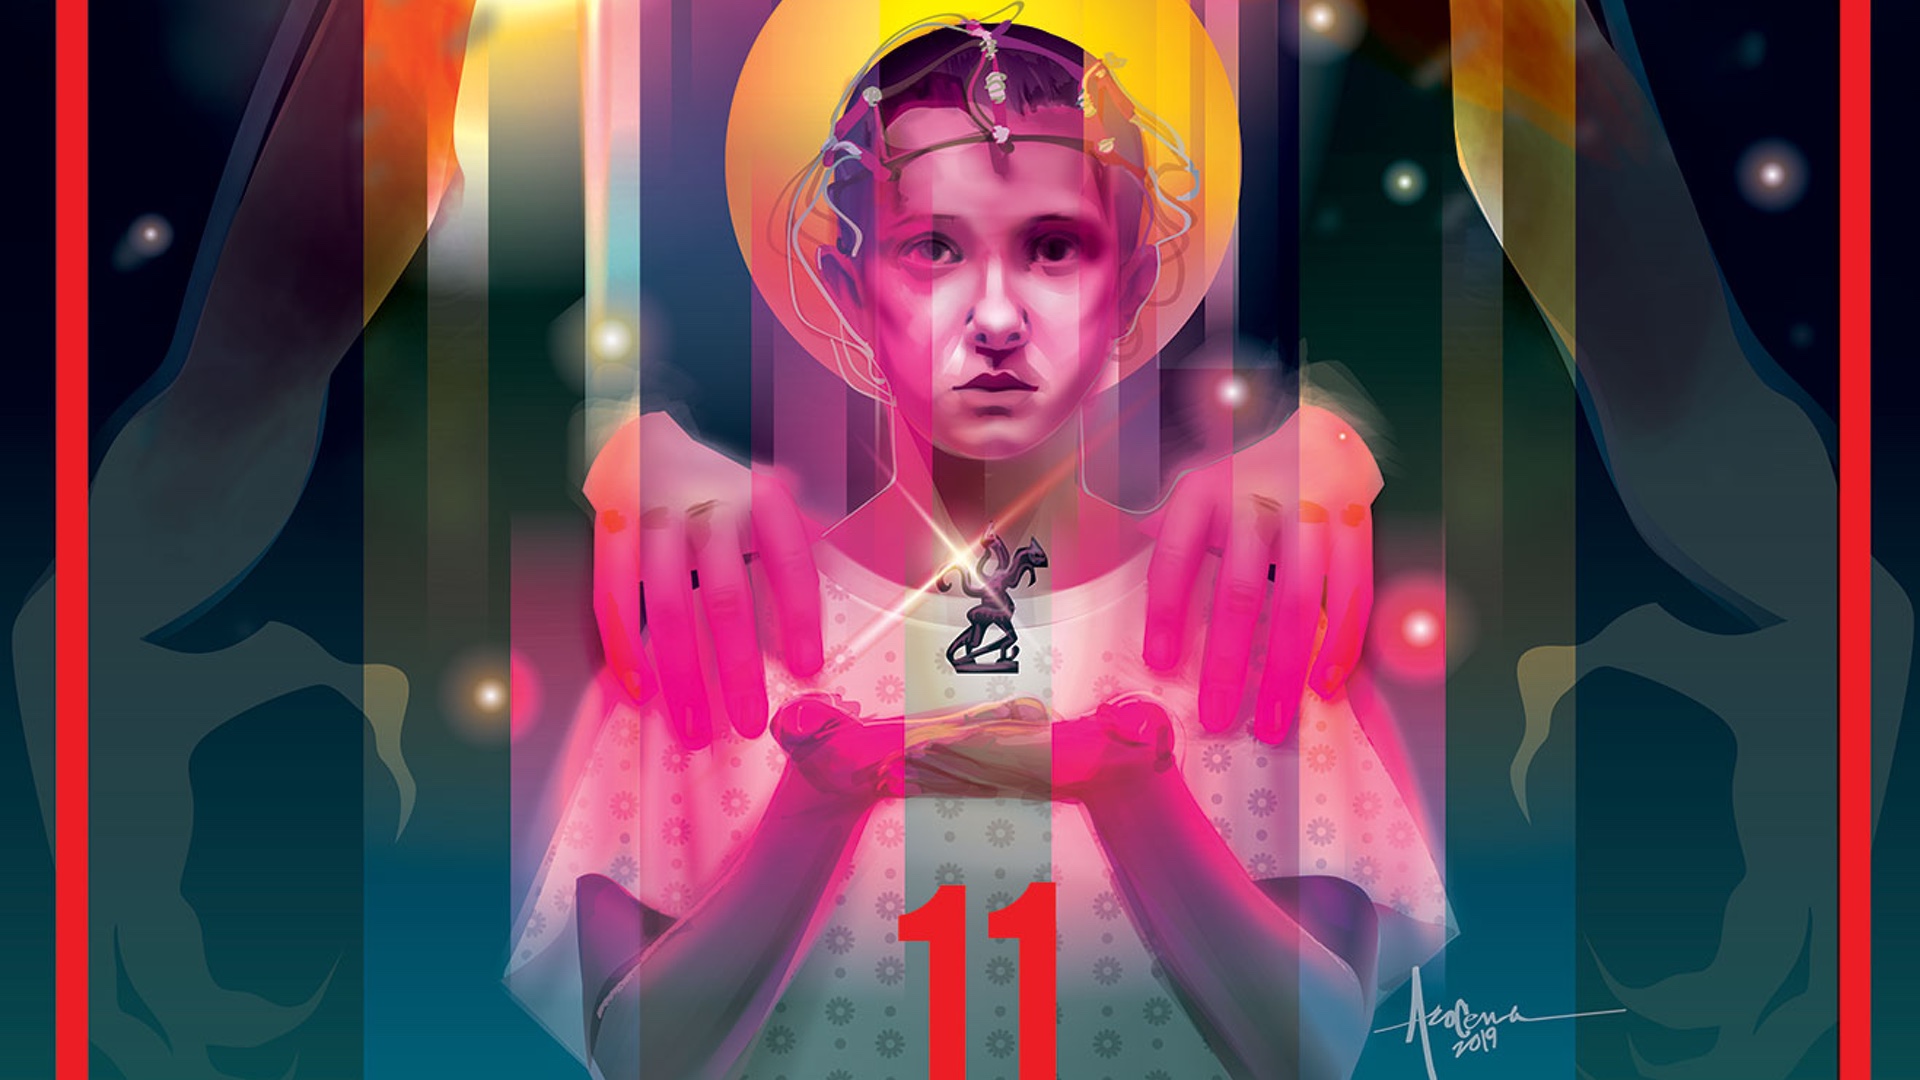 Check Out Some Art From This Gorgeous New STRANGER THINGS Art Book